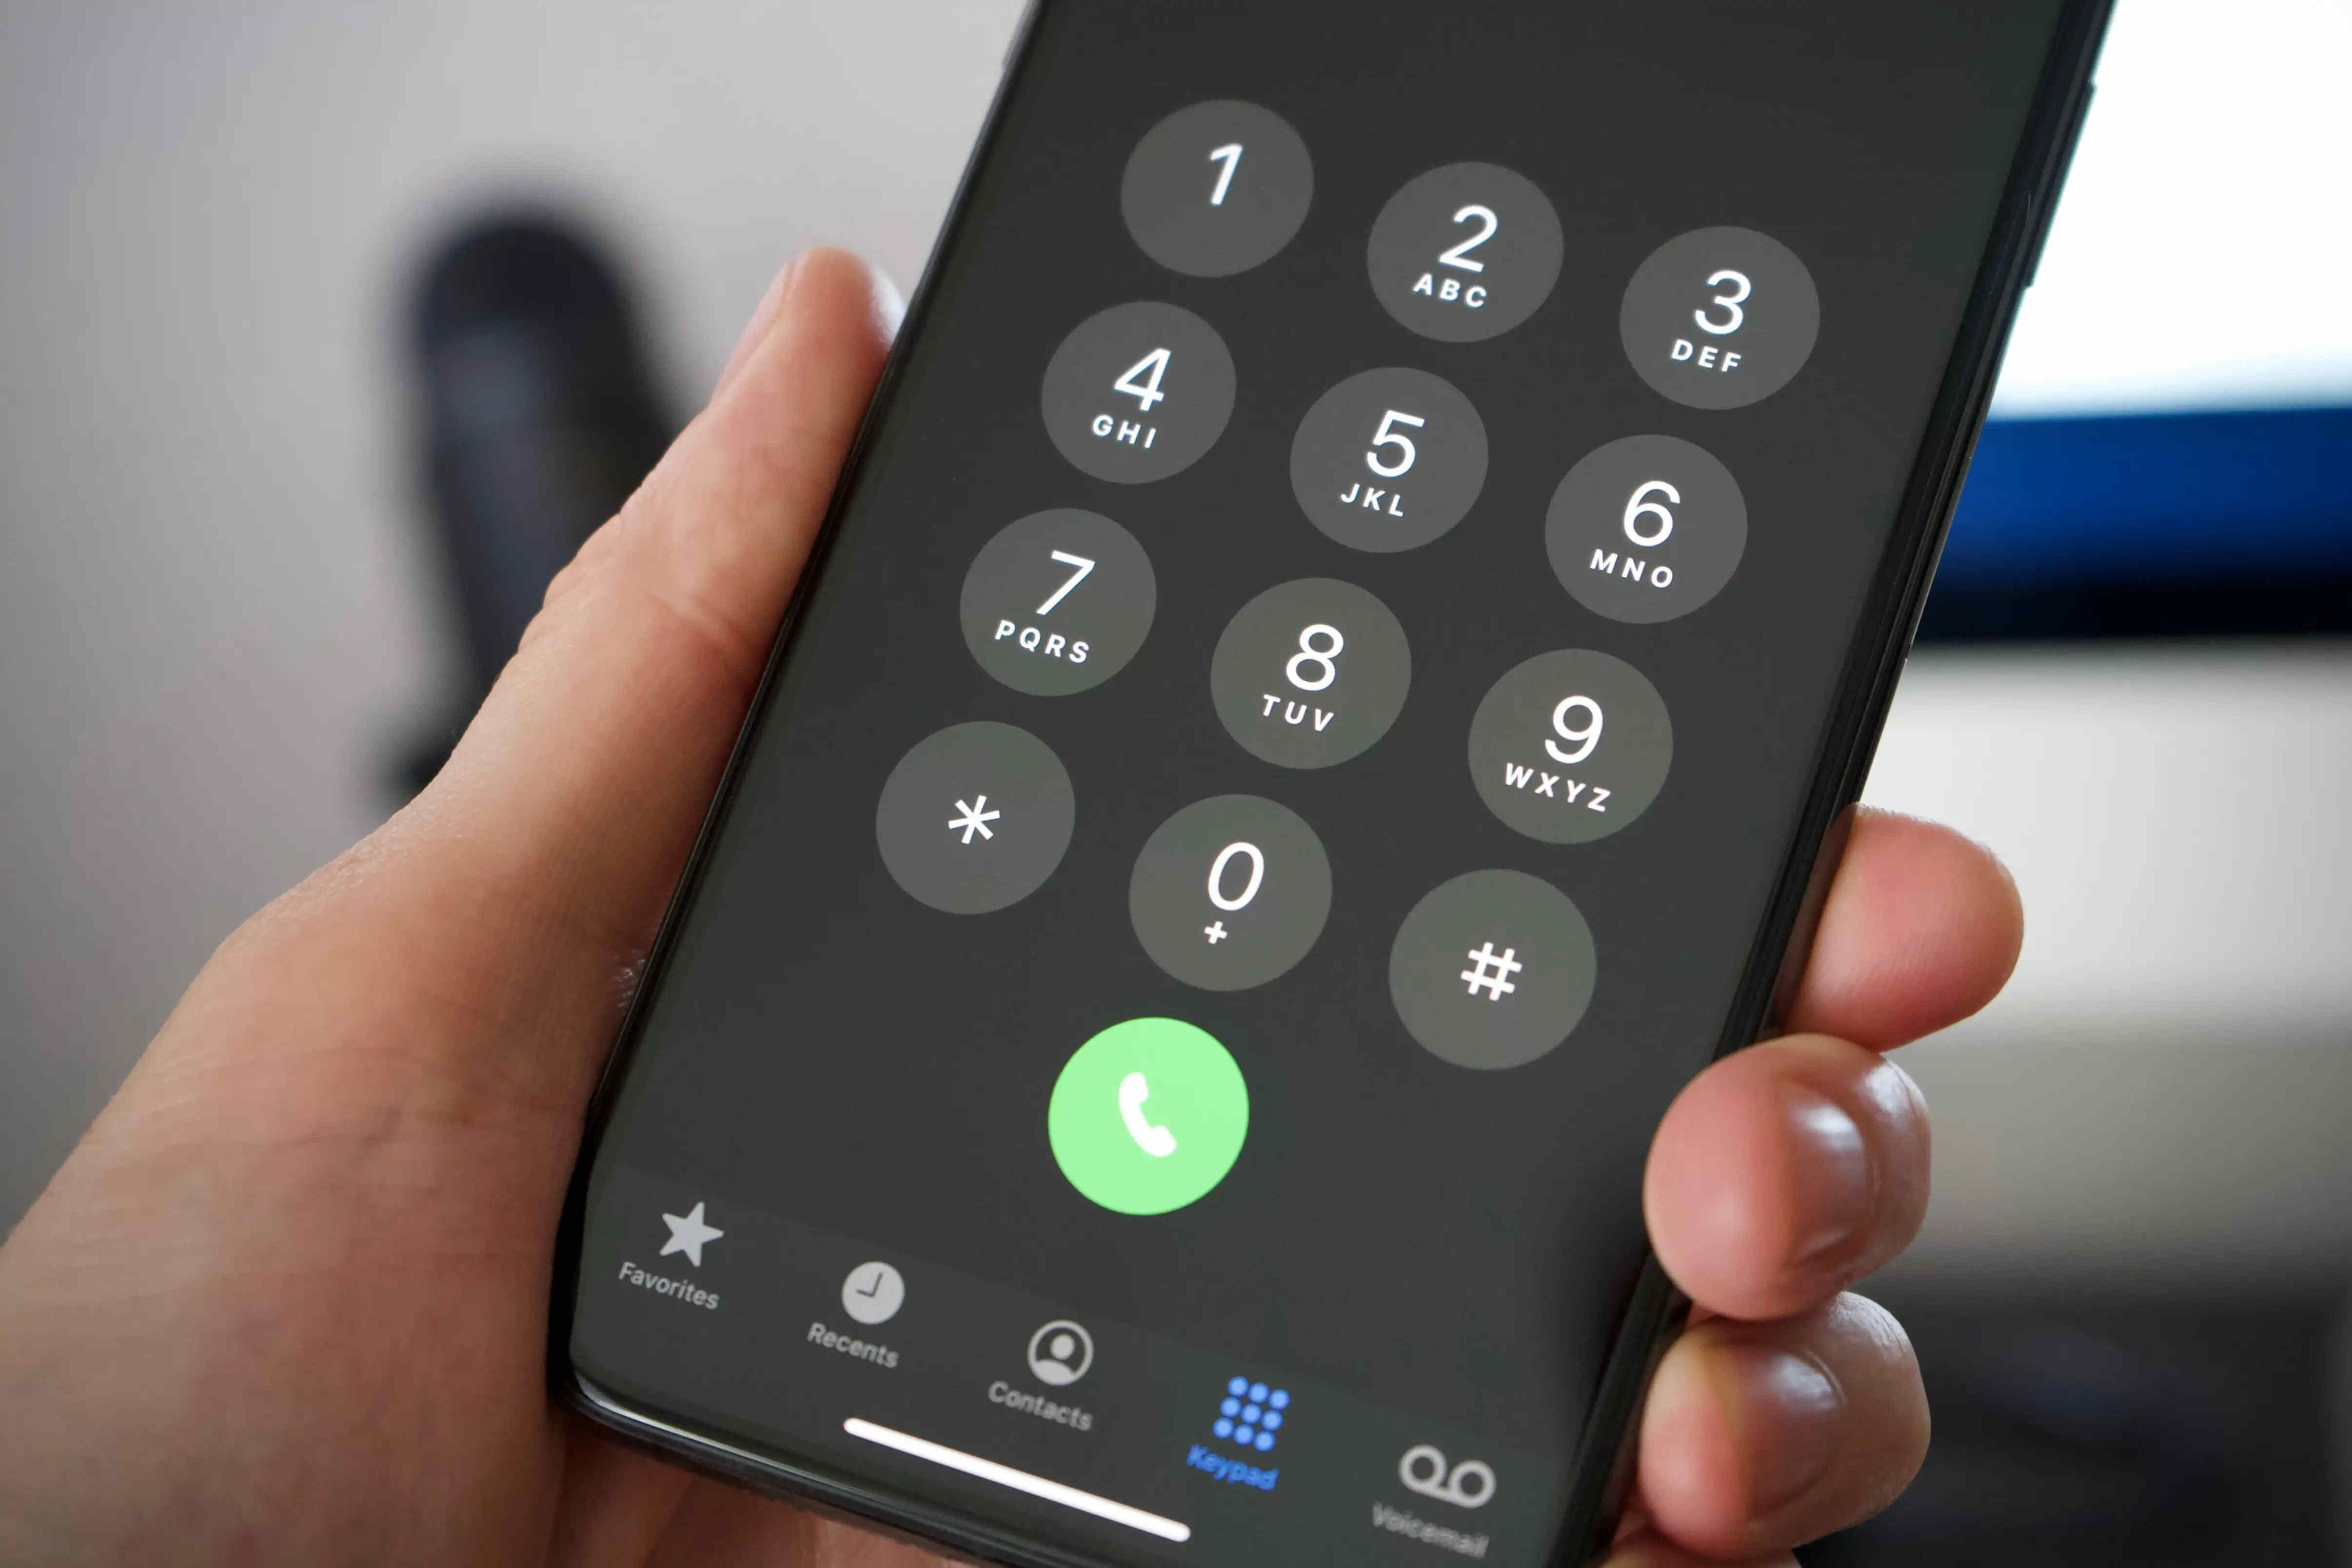 private-call-prevention-blocking-private-numbers-on-iphone-12